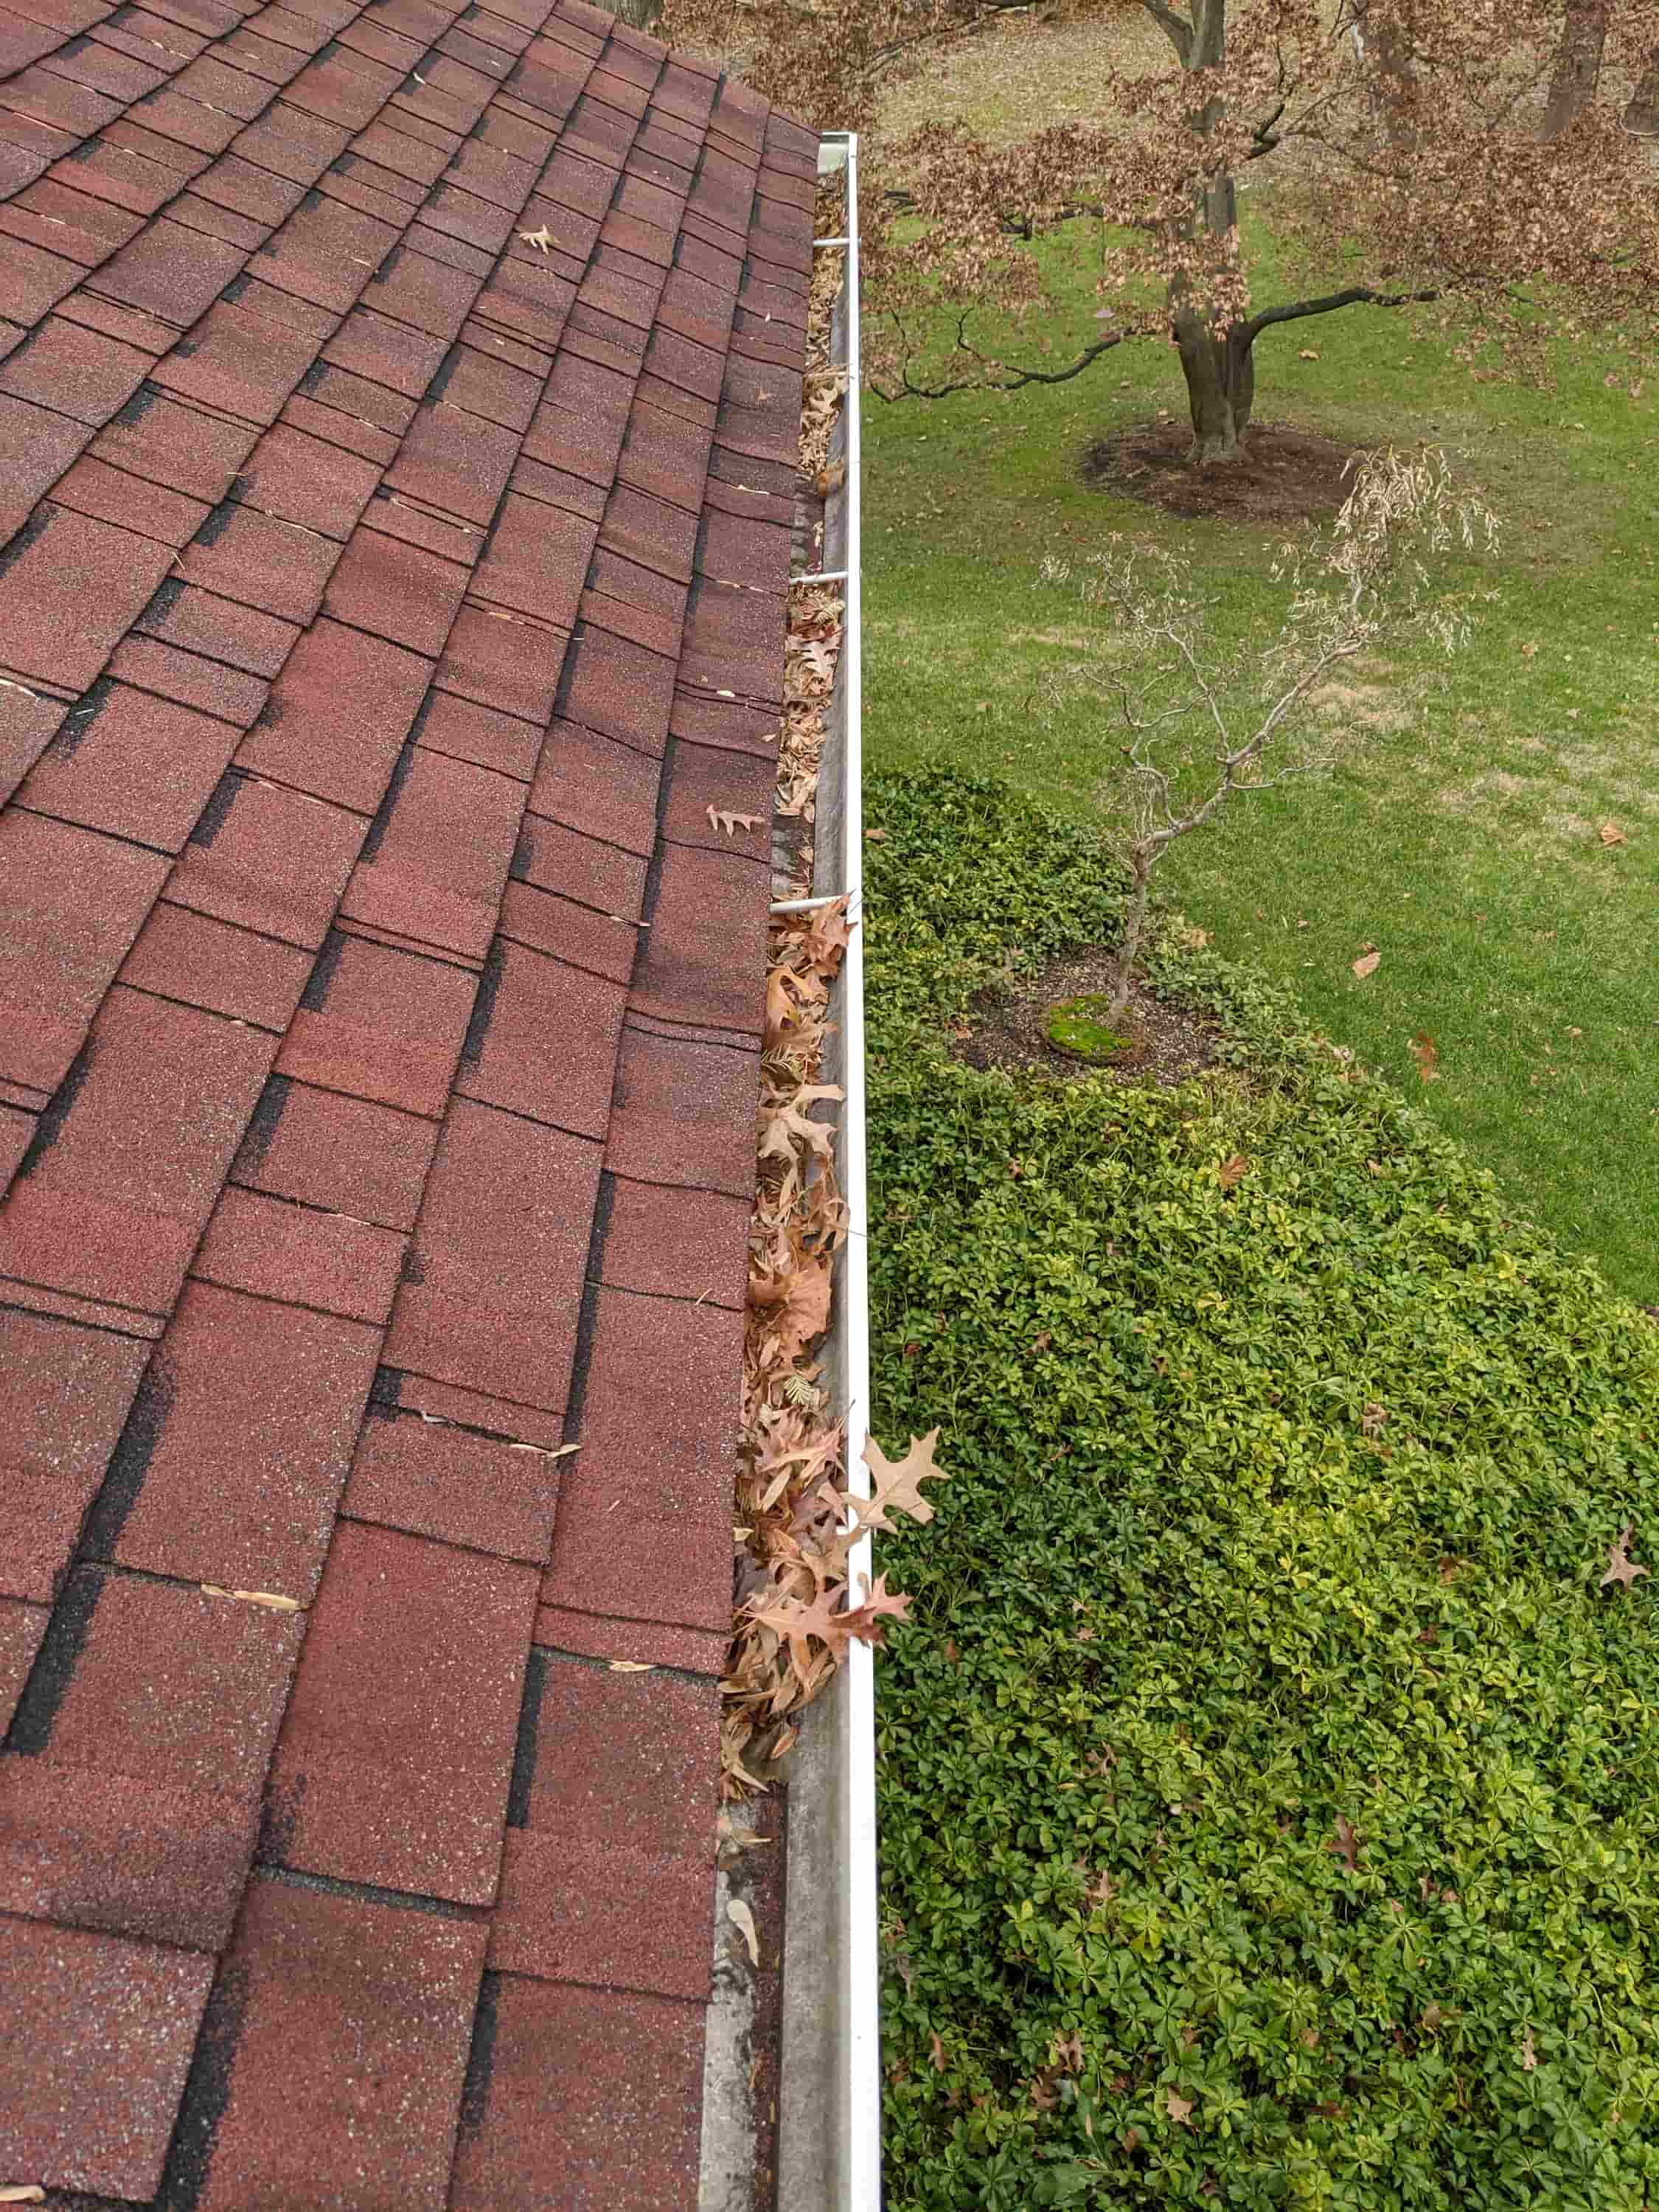 how to clean clogged gutter downspout